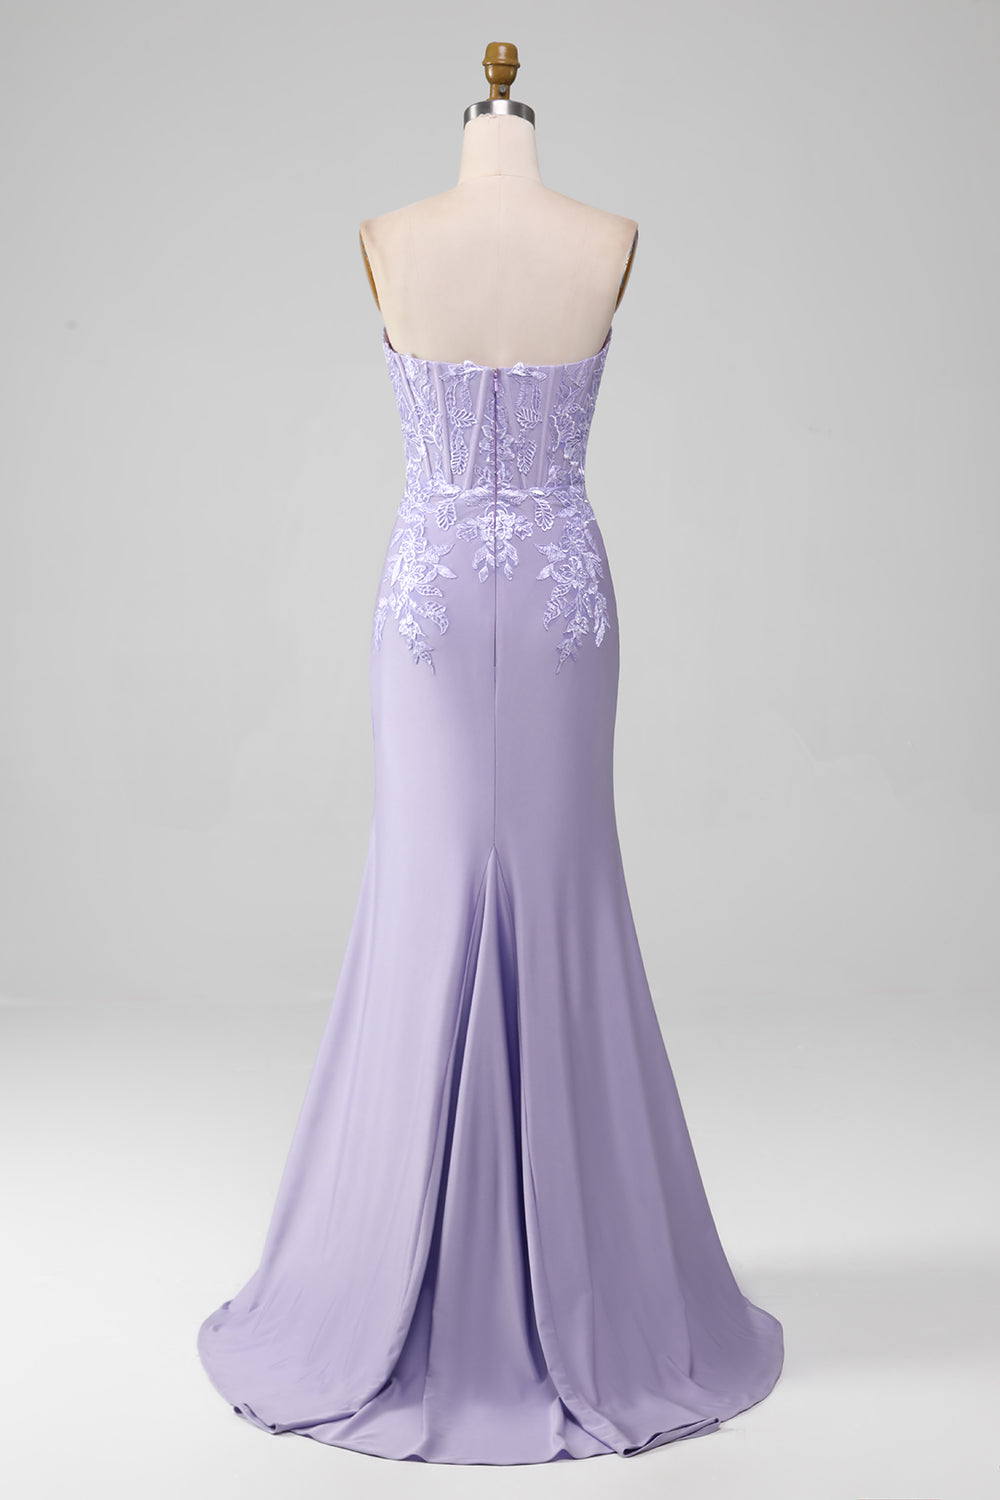 Lilac Sheath Strapless Corset Prom Dresses With Lace Appliques